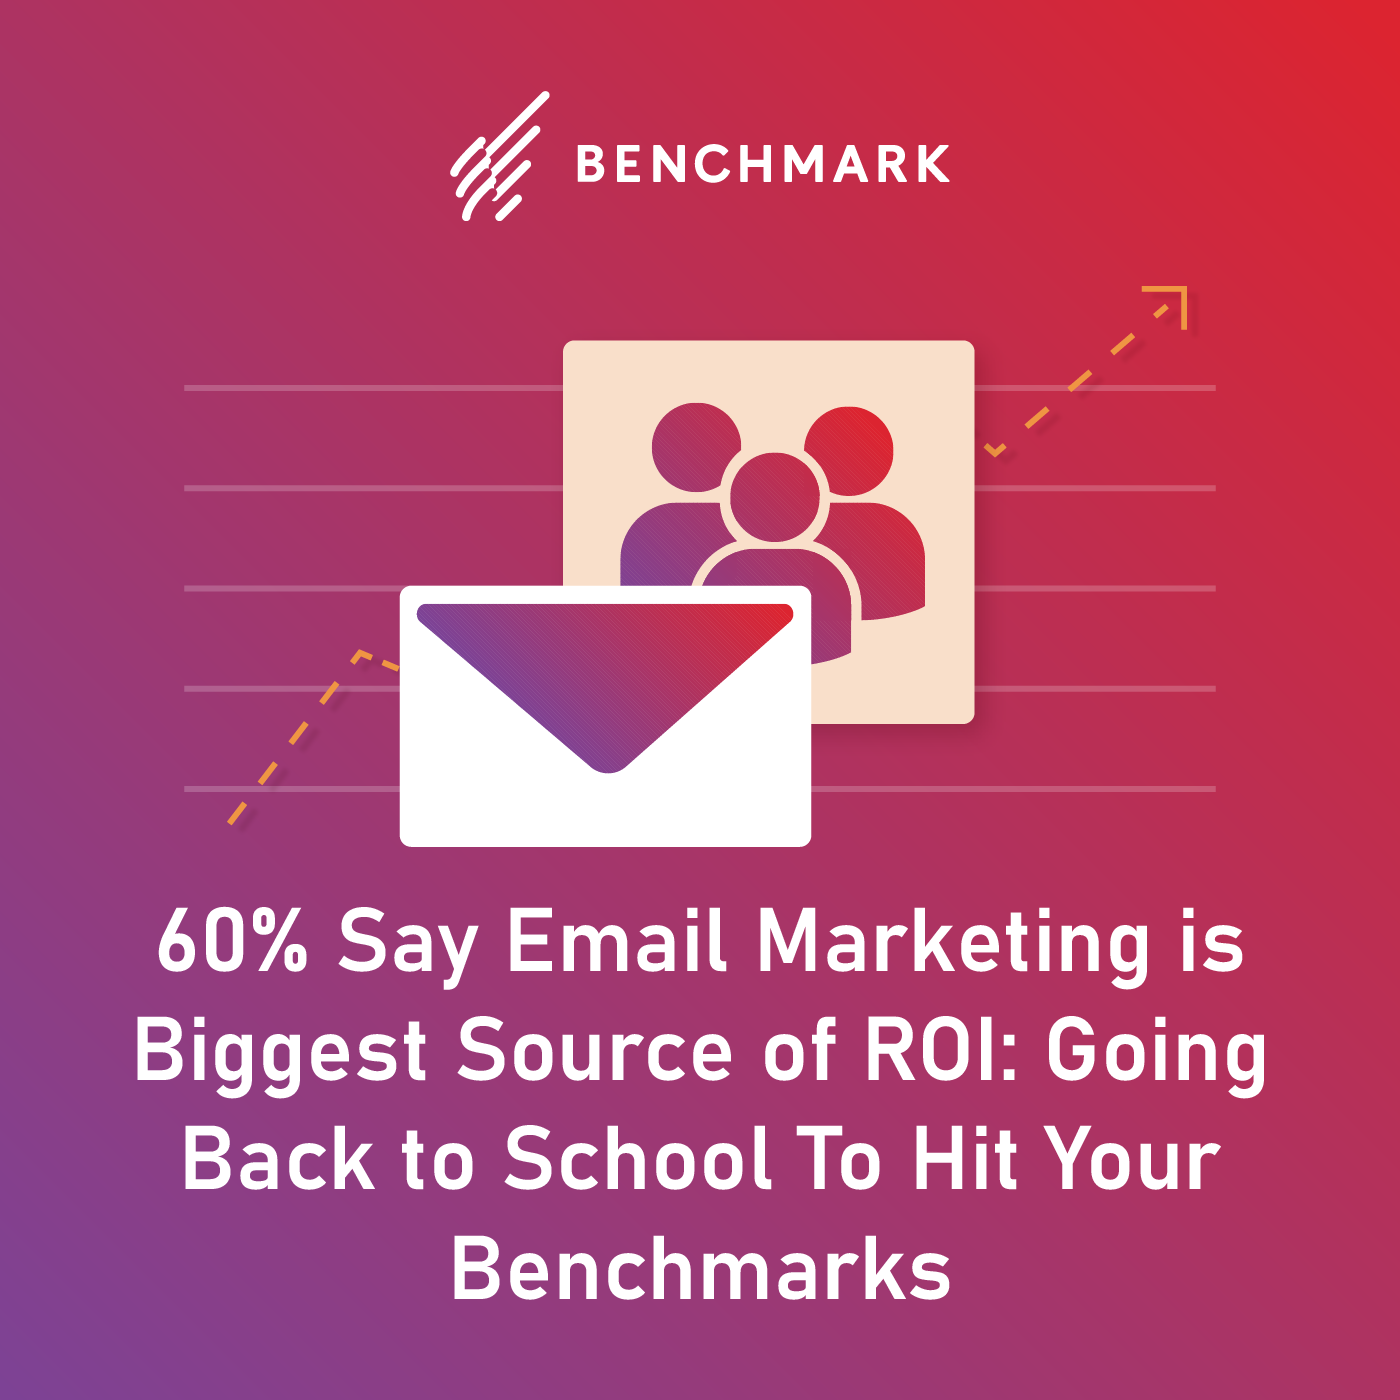 60% Say Email Marketing is Biggest Source of ROI: Going Back to School To Hit Your Benchmarks